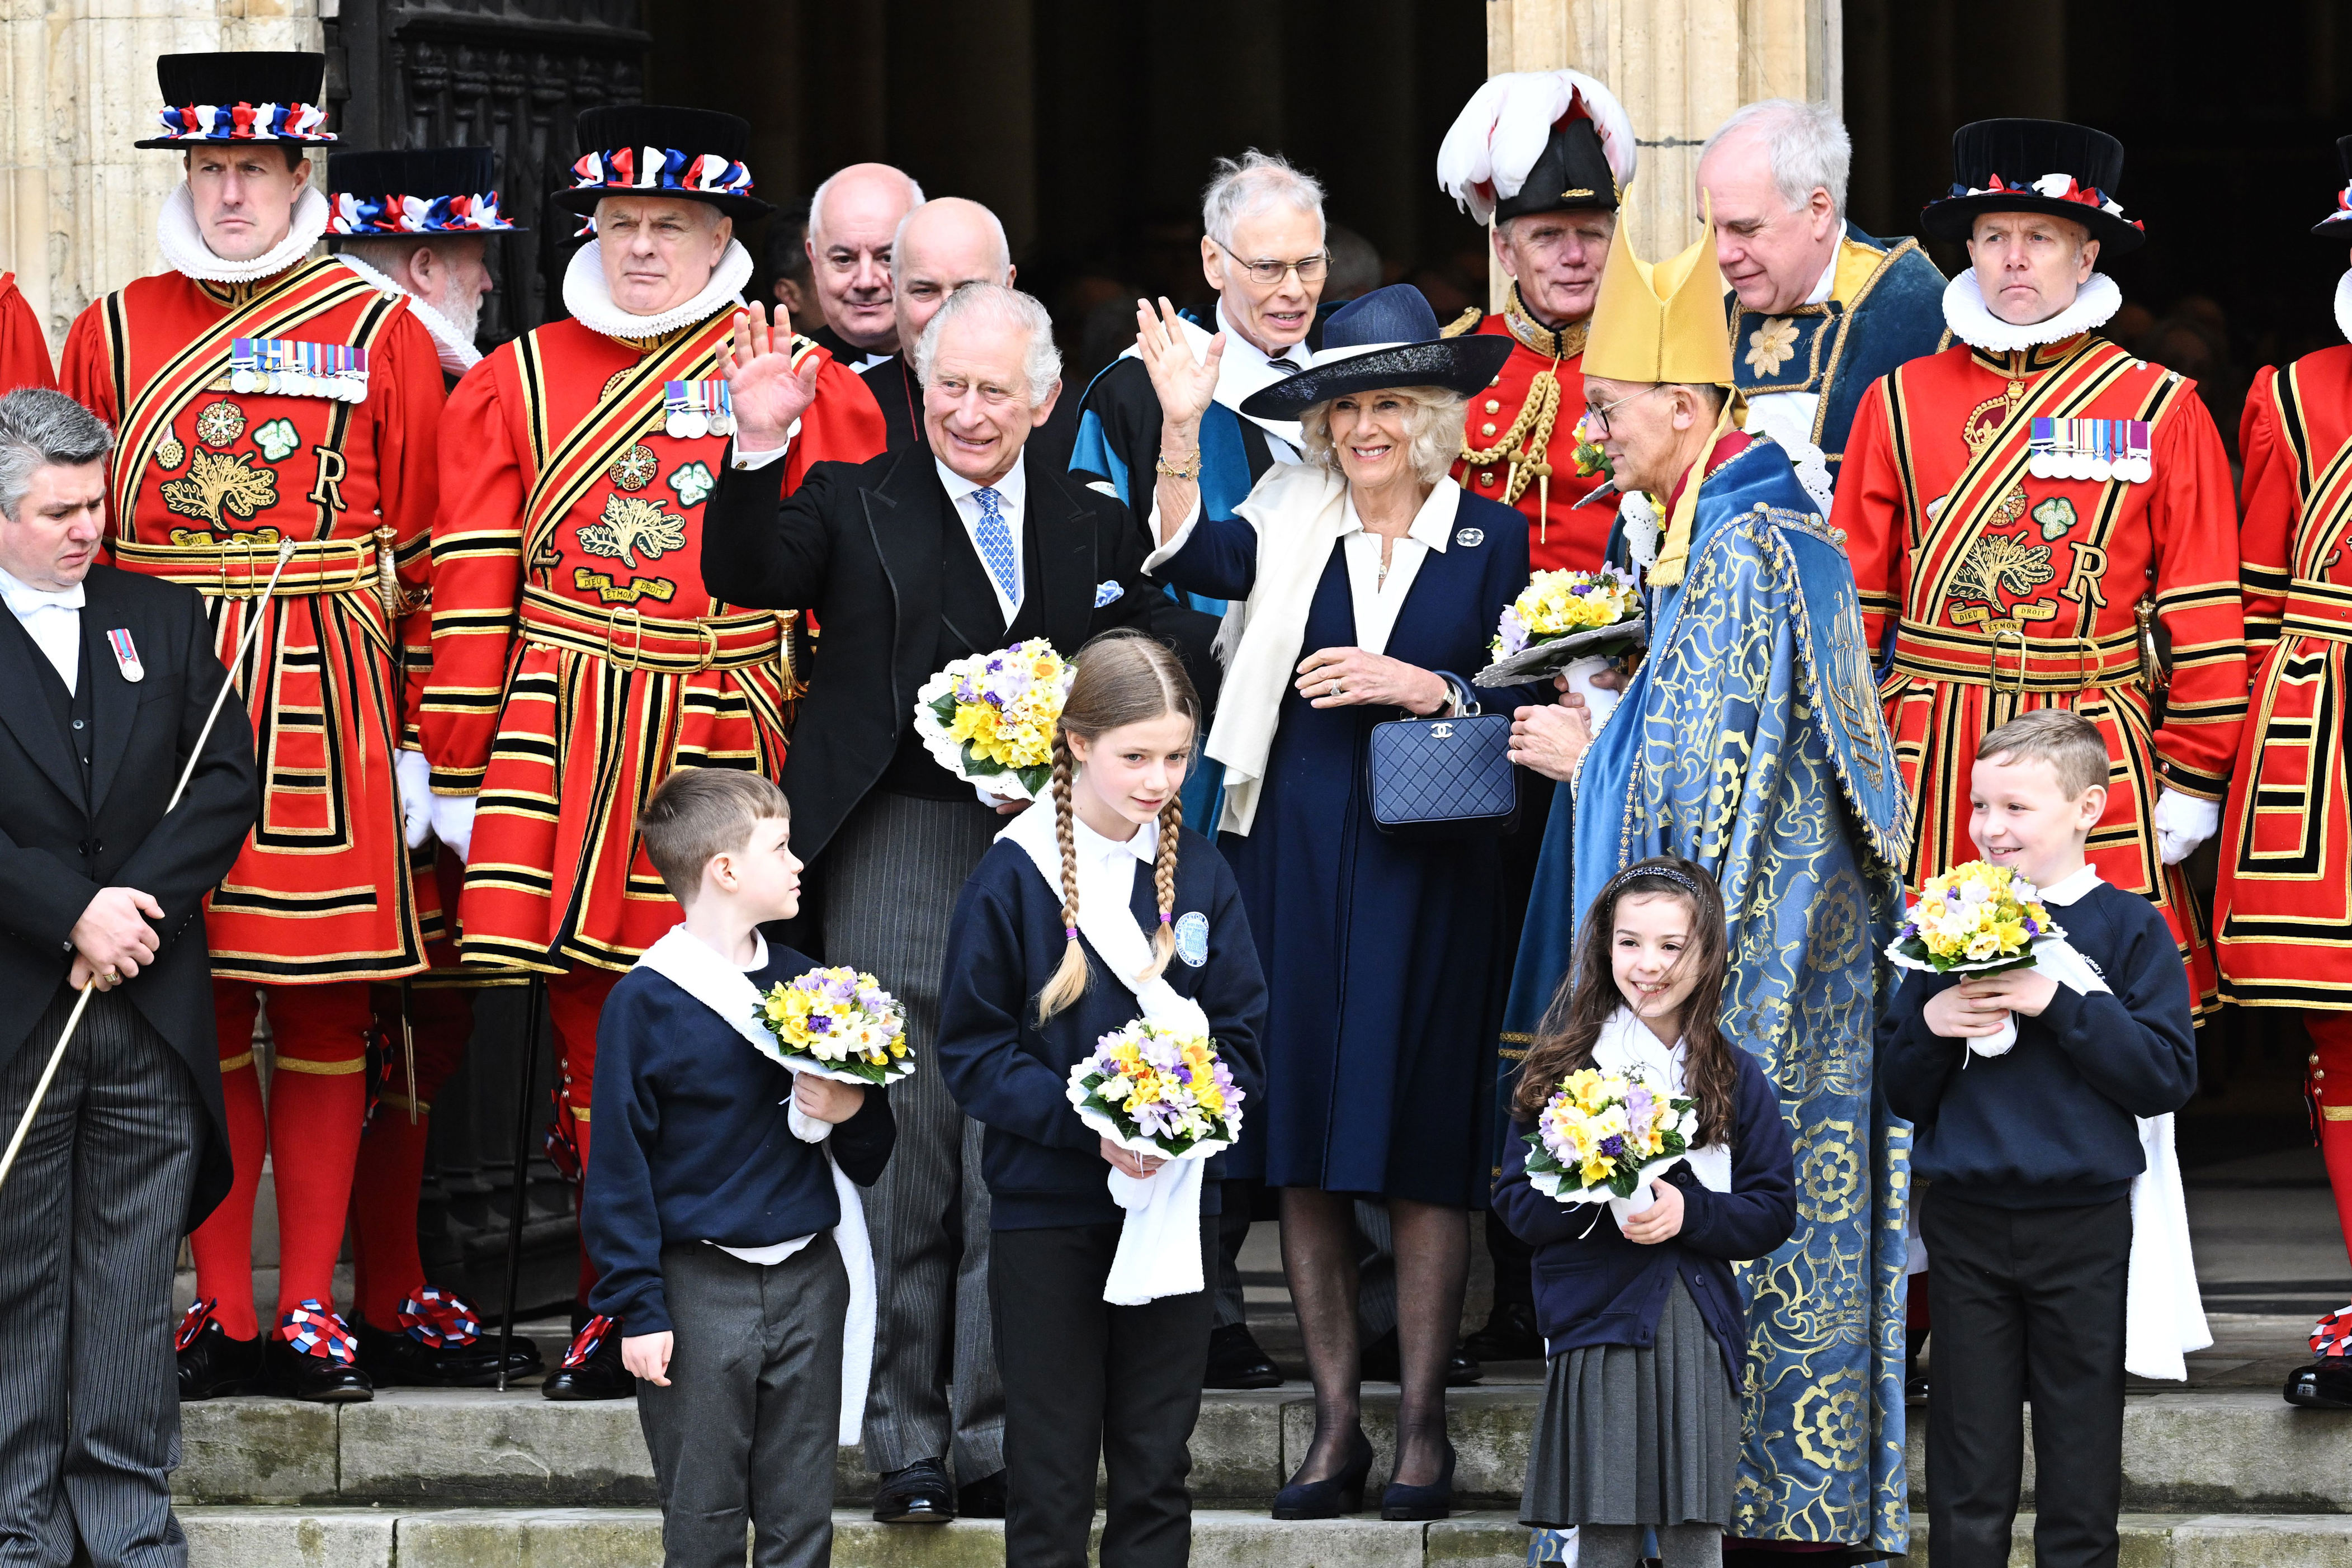 <p>King Charles III and Queen Consort Camilla attended the annual Royal Maundy Service at York Minster, the second largest Gothic cathedral in Northern Europe, in York, England, on April 6, 2023. Following a tradition going back hundreds of years, the monarch presented "Maundy money" to 74 men and 74 women in recognition of the service they have provided to their community. </p>